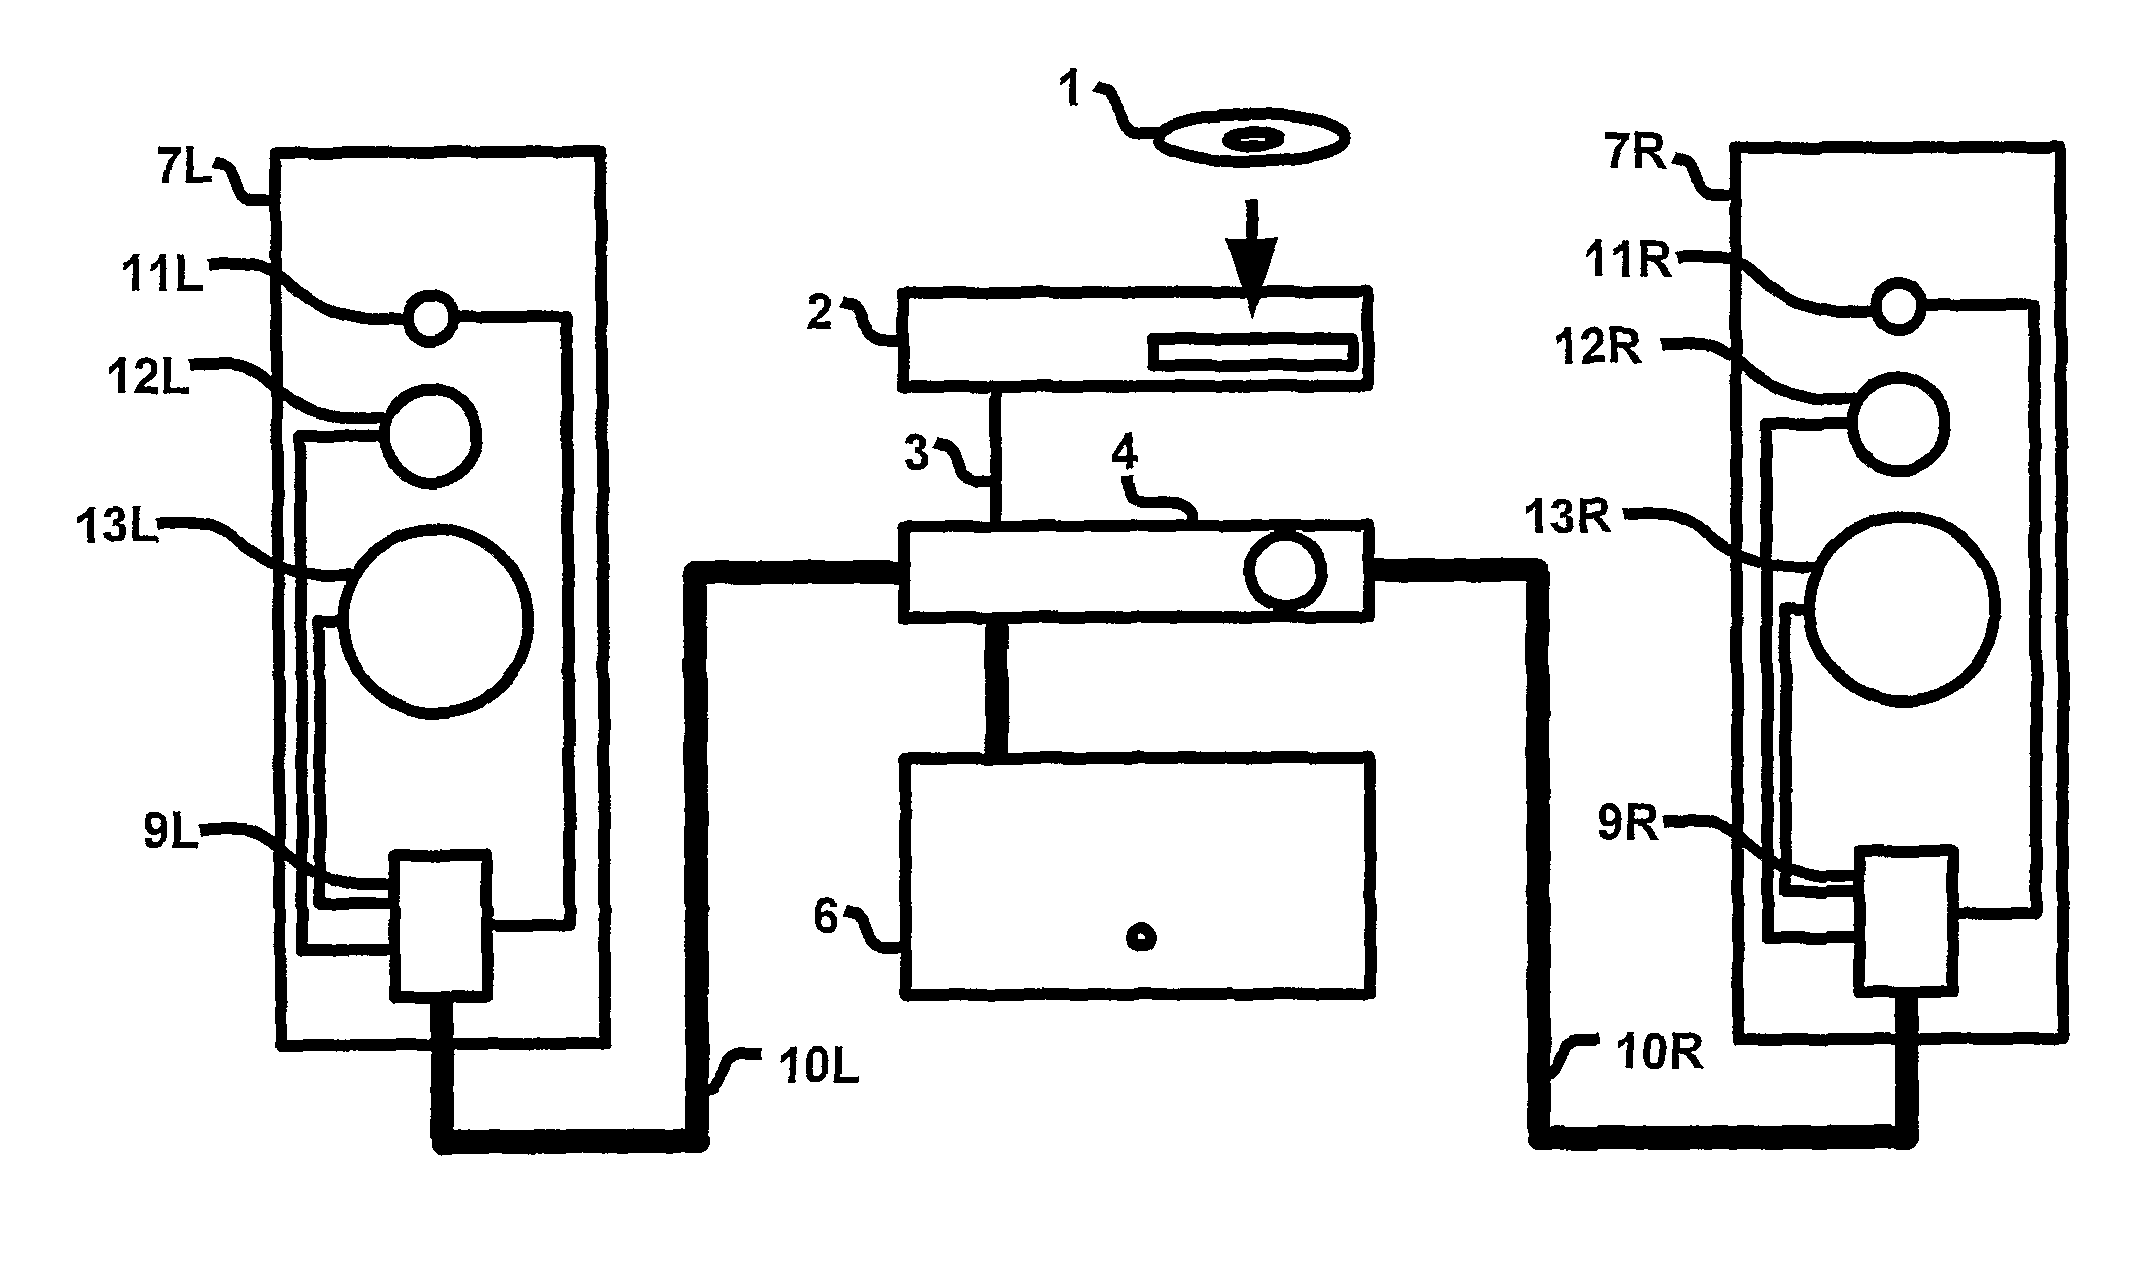 Sound reproducing system with superimposed digital signal